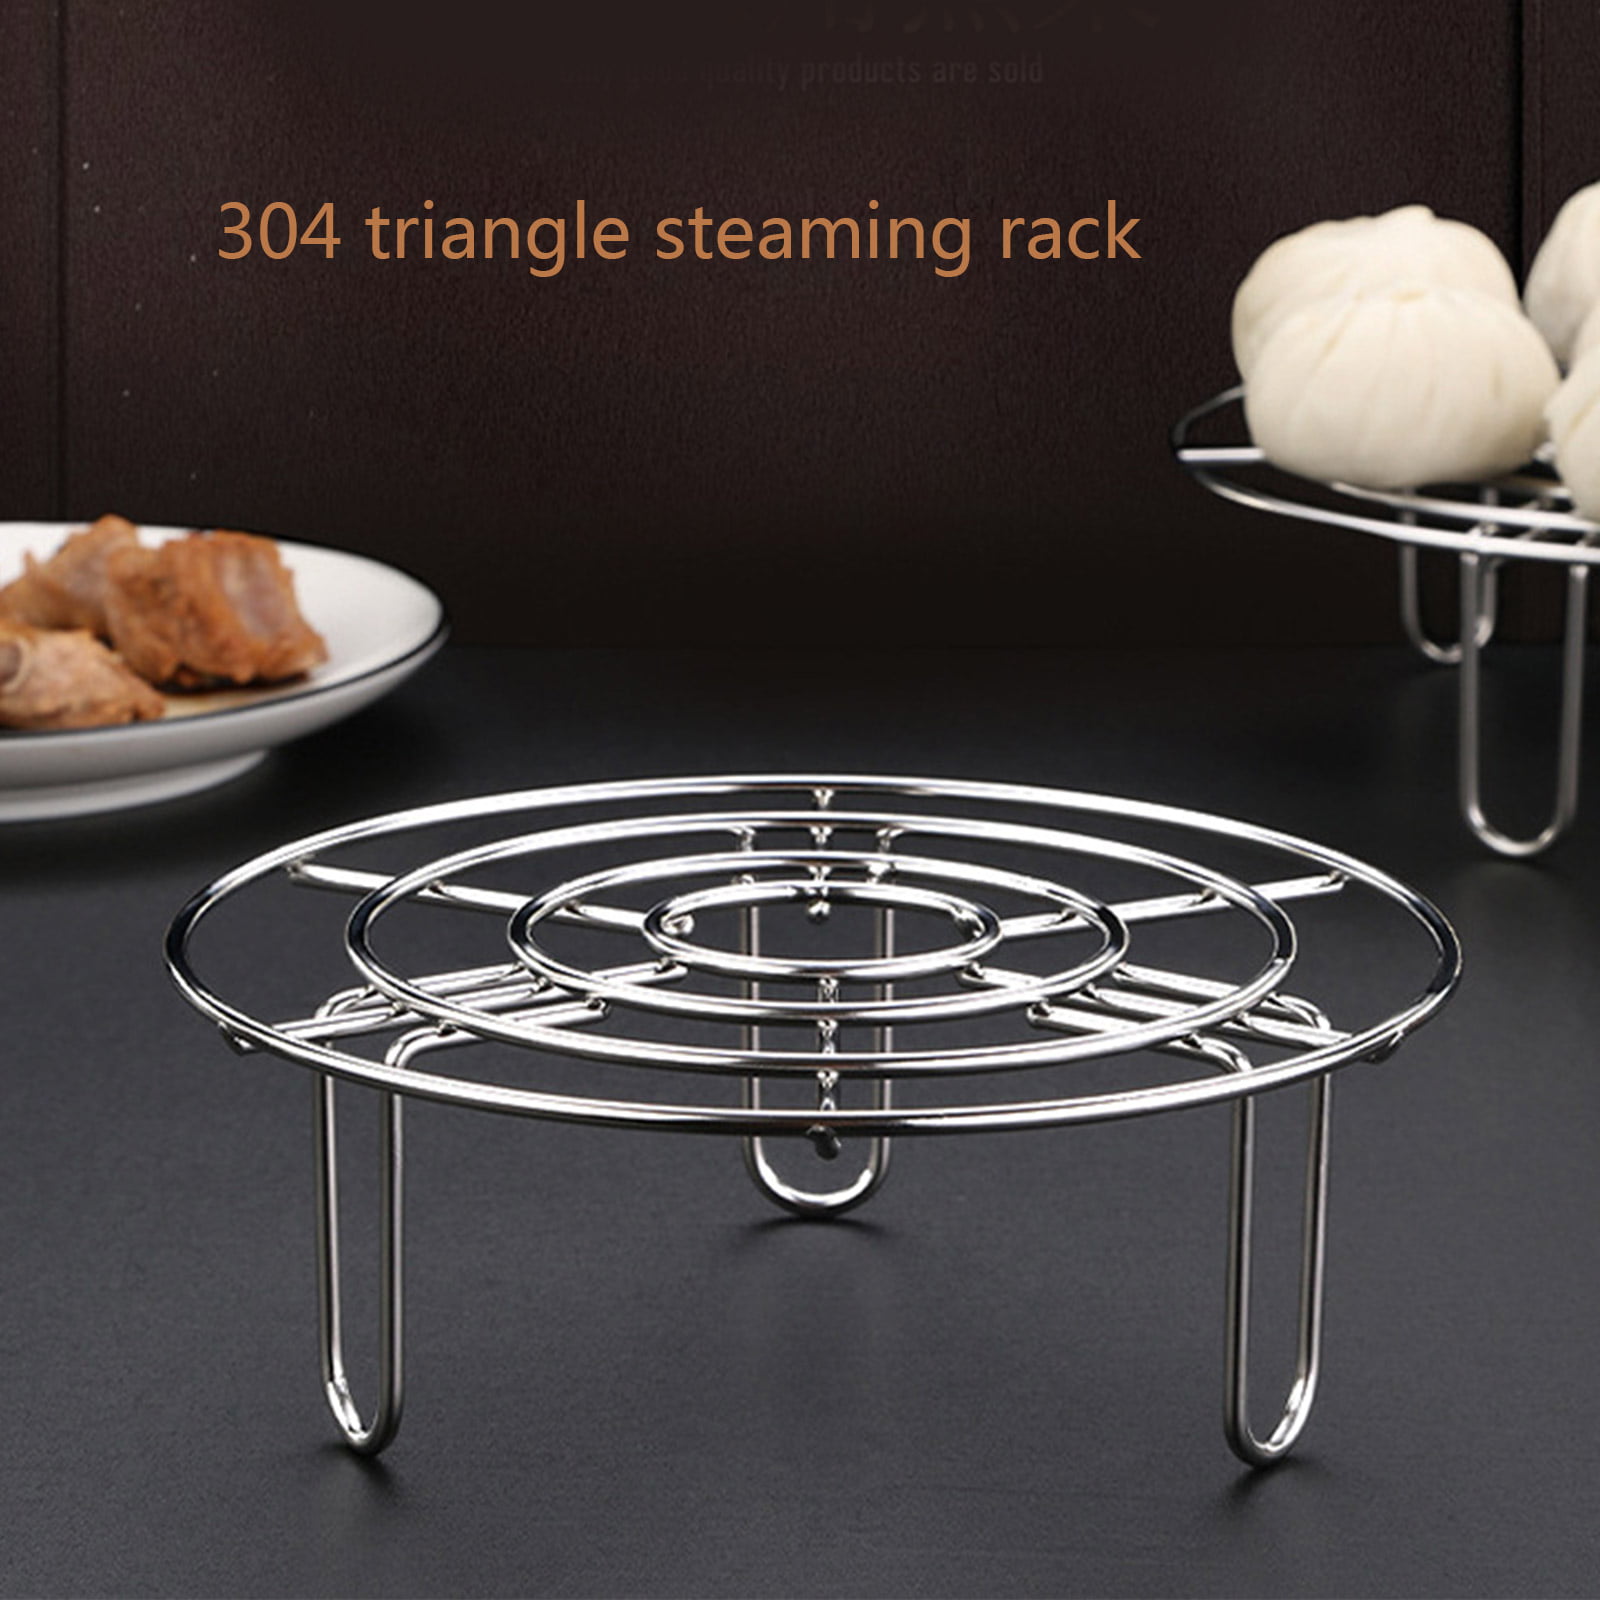 1pc Stainless Steel 7-hole Egg Steamer Rack, Kitchen Triangular High-foot Steaming  Rack Multi-function Insulated Steaming Rack